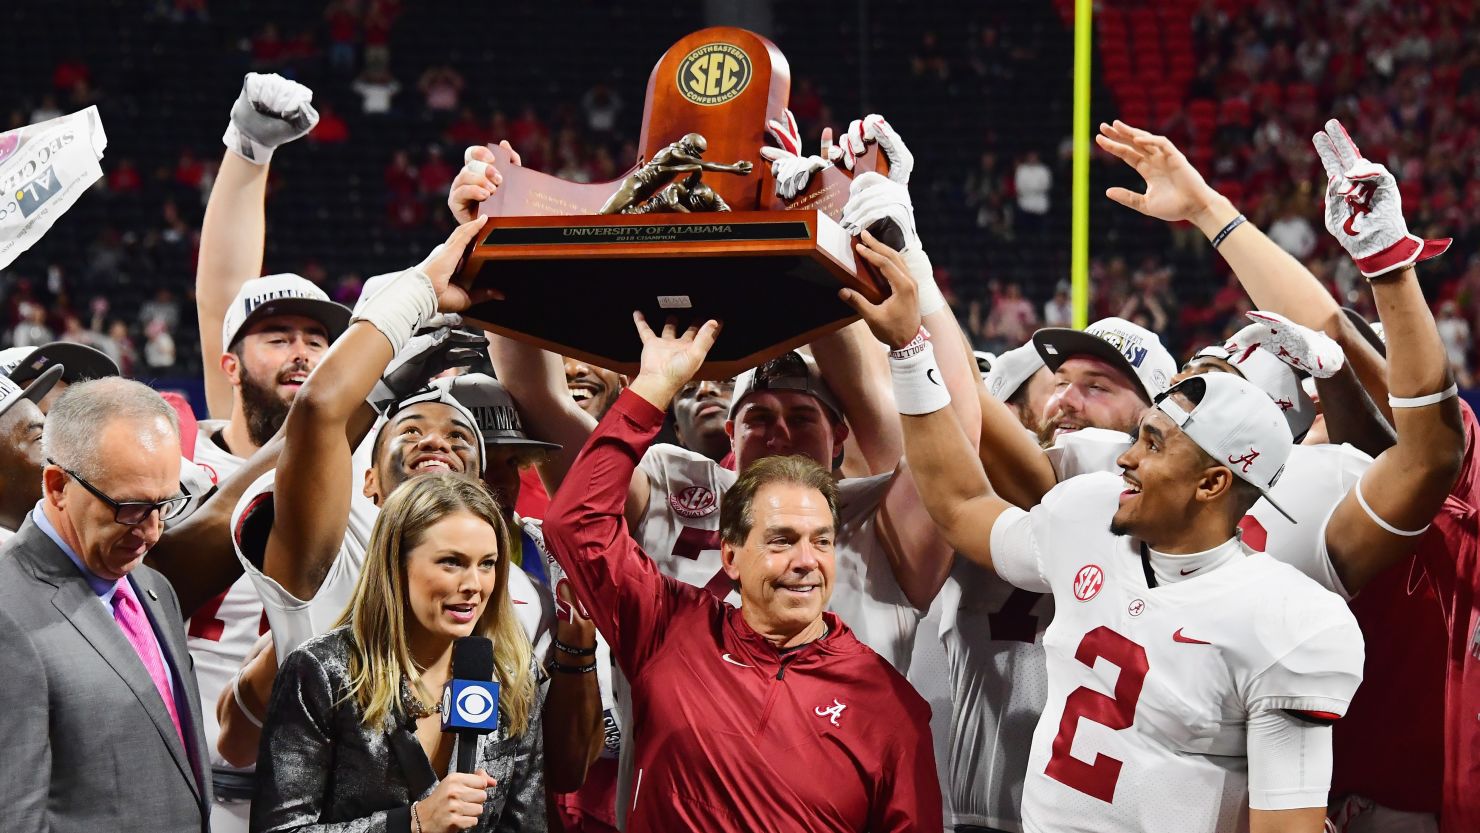 Coach Nick Saban and the Alabama Crimson Tide will return to this year's College Football Playoff.